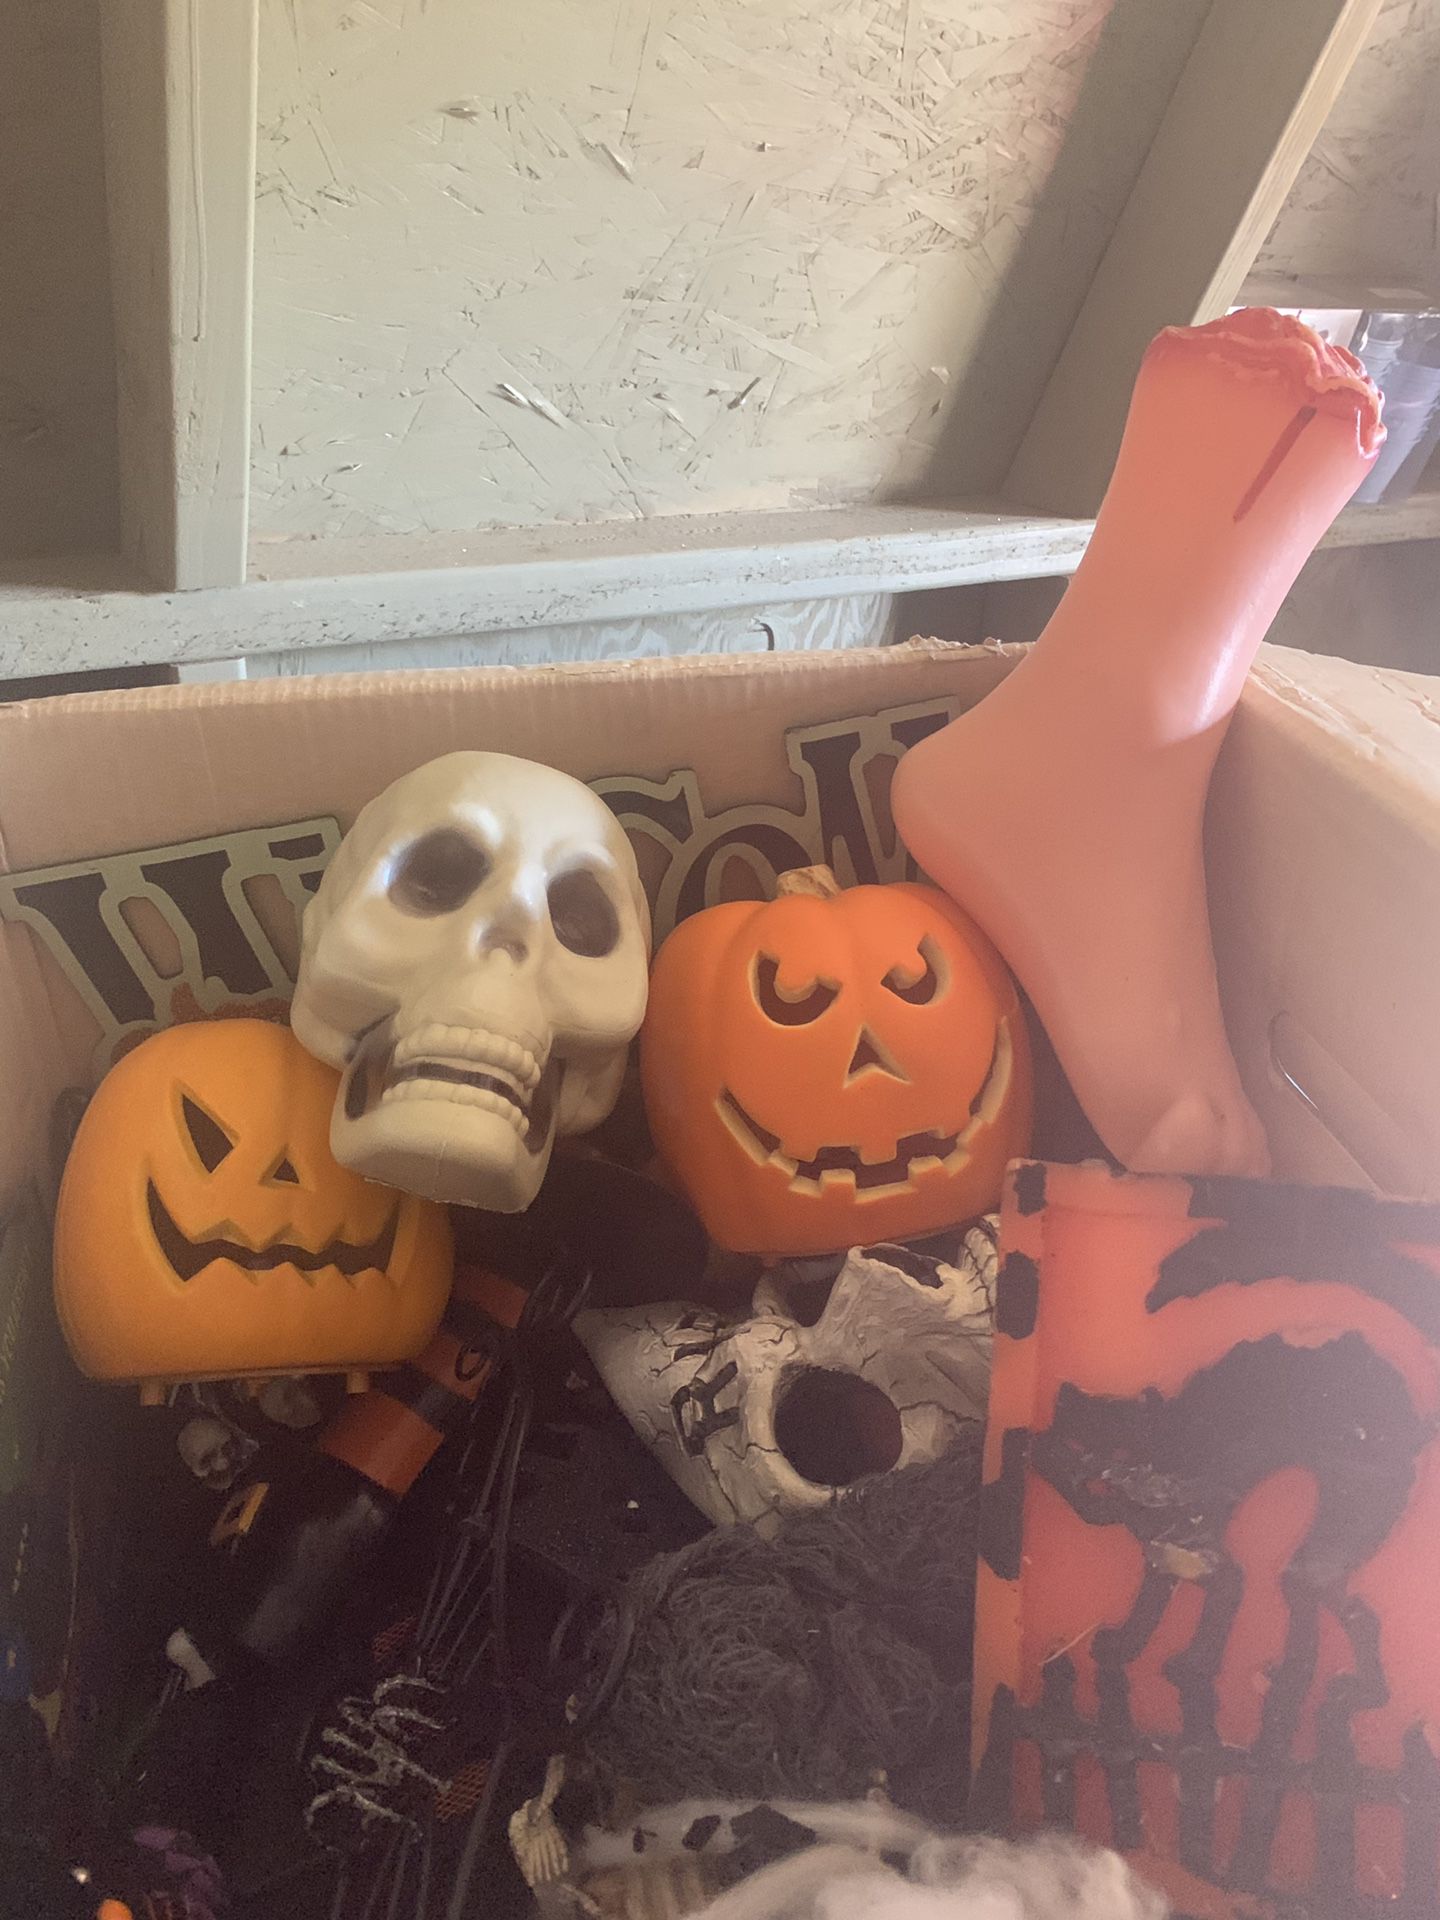 Semi new Halloween decorations selling all as a bundle